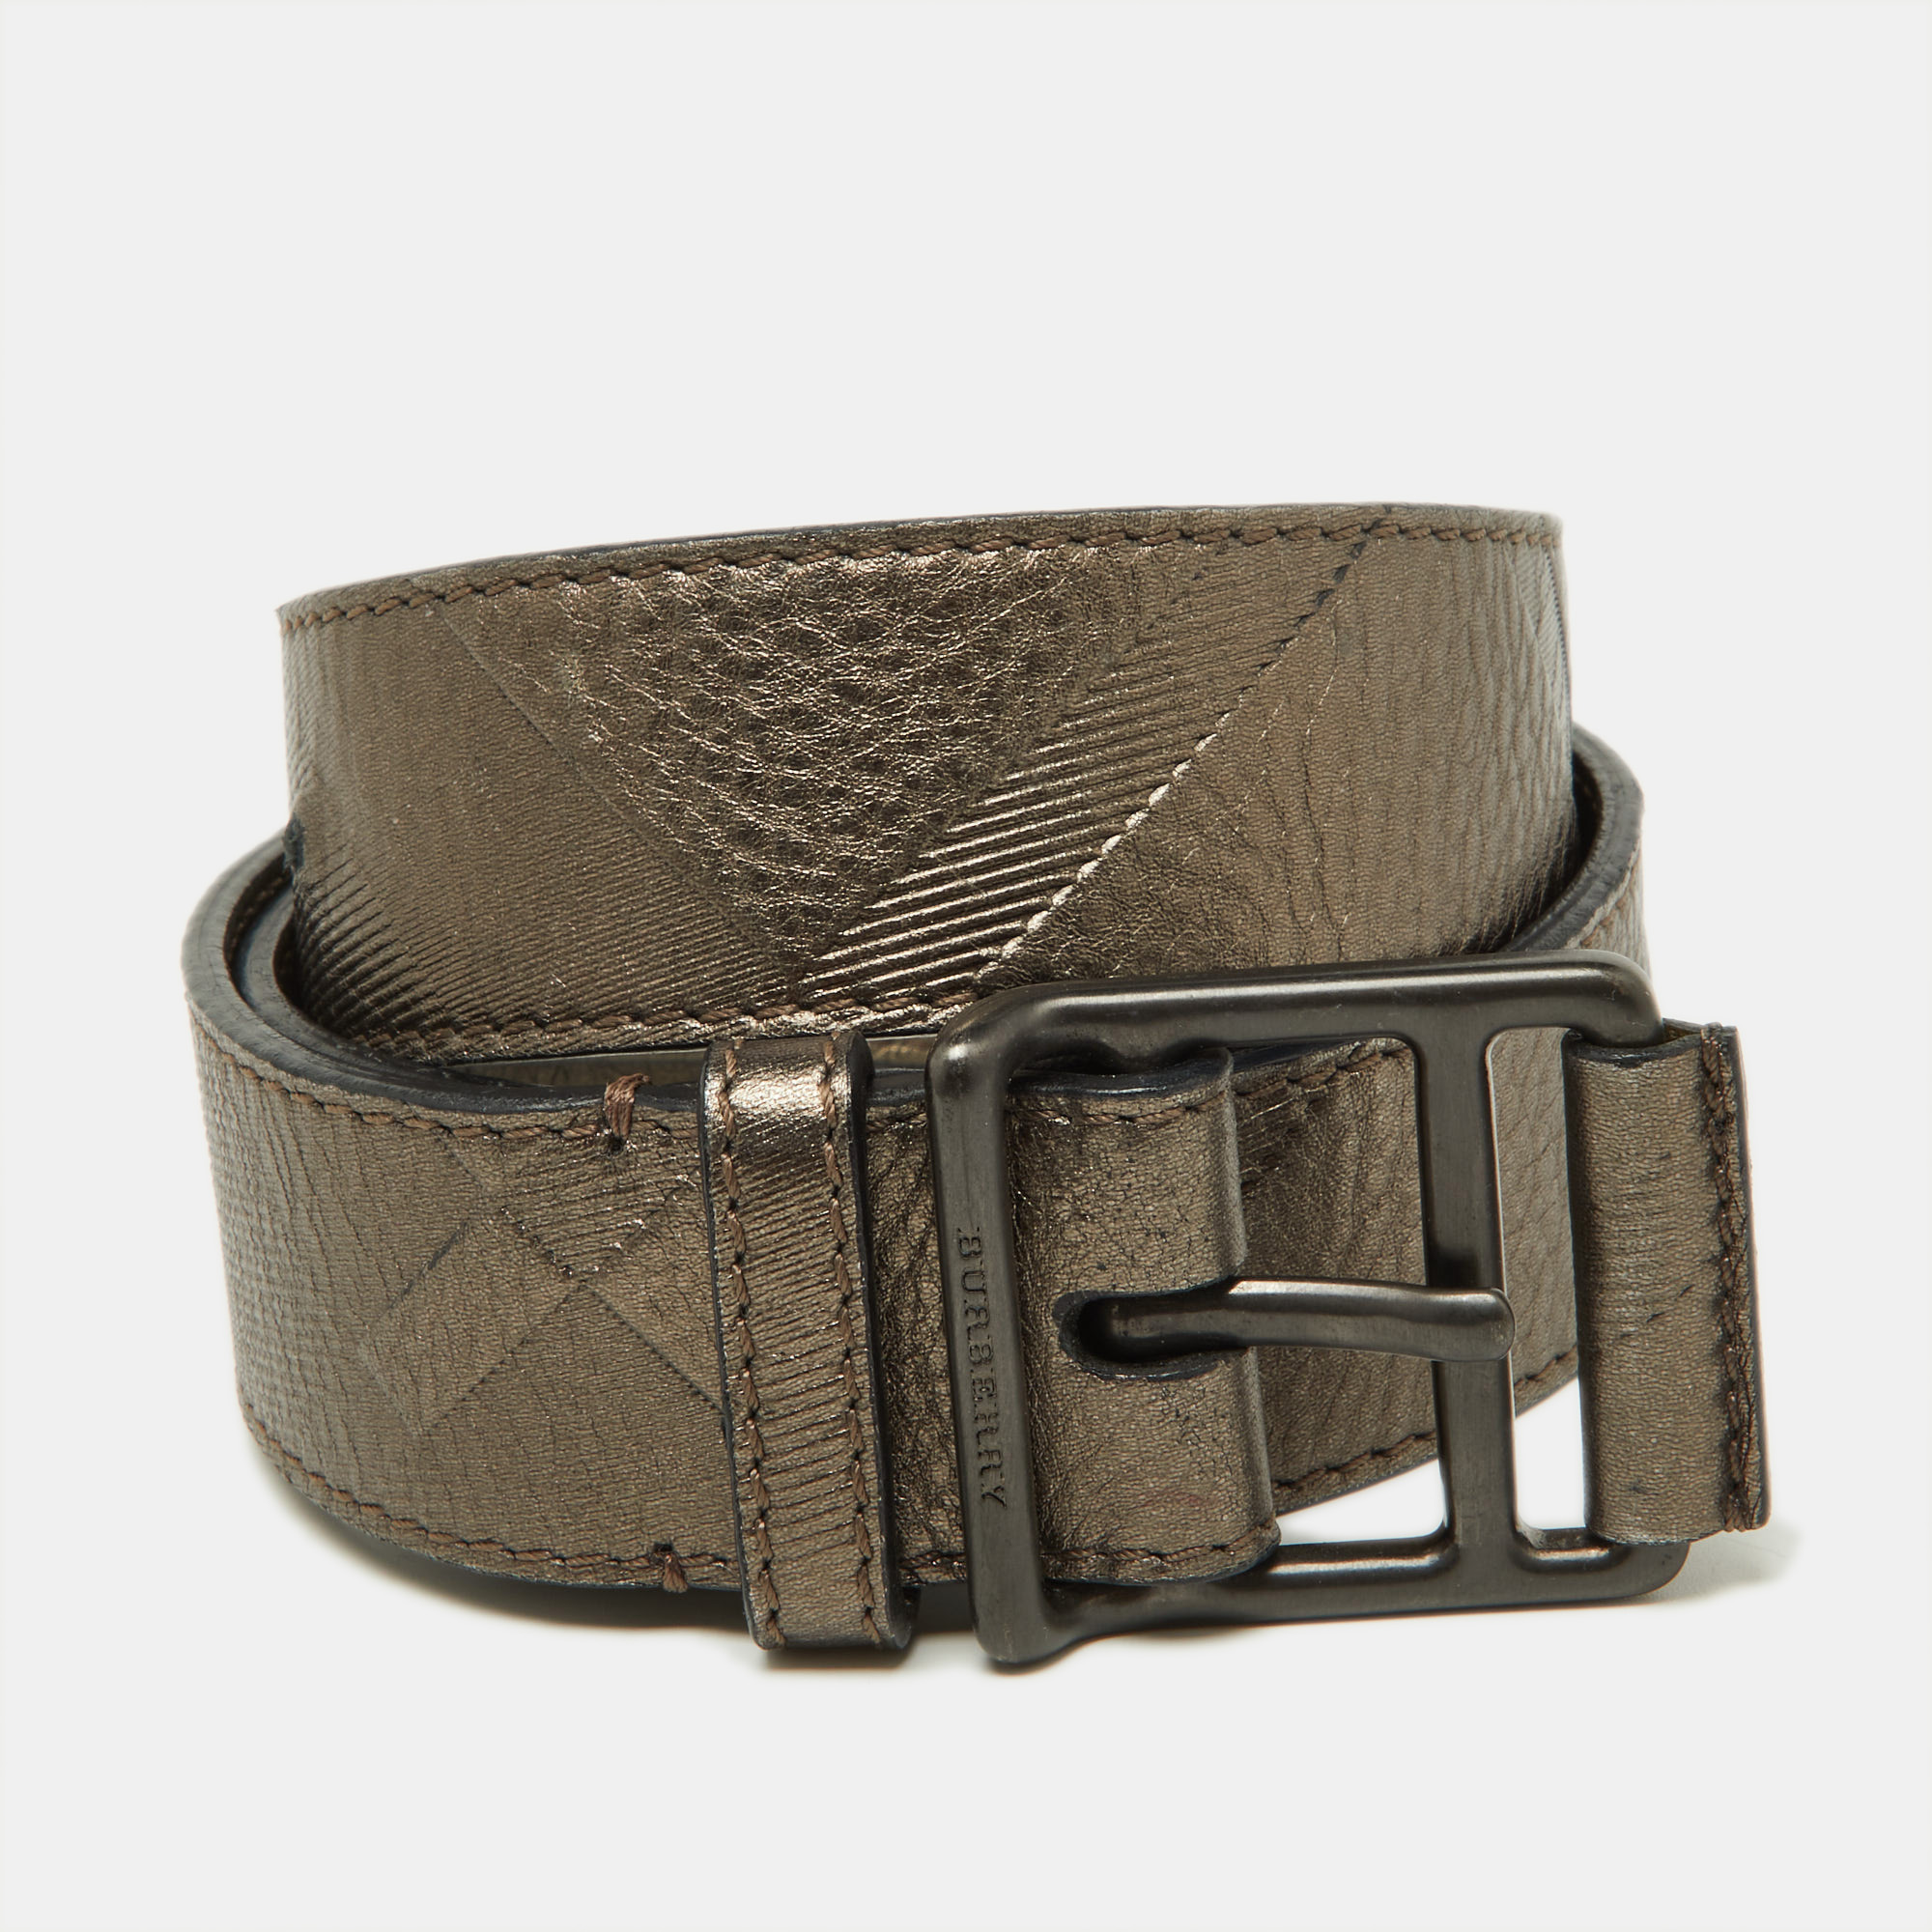 A classic add on to your collection of belts this Burberry belt has been crafted from metallic leather. It has an exterior with a buckle with an engraved brand name. This piece carries a classy style making it a wardrobe essential.